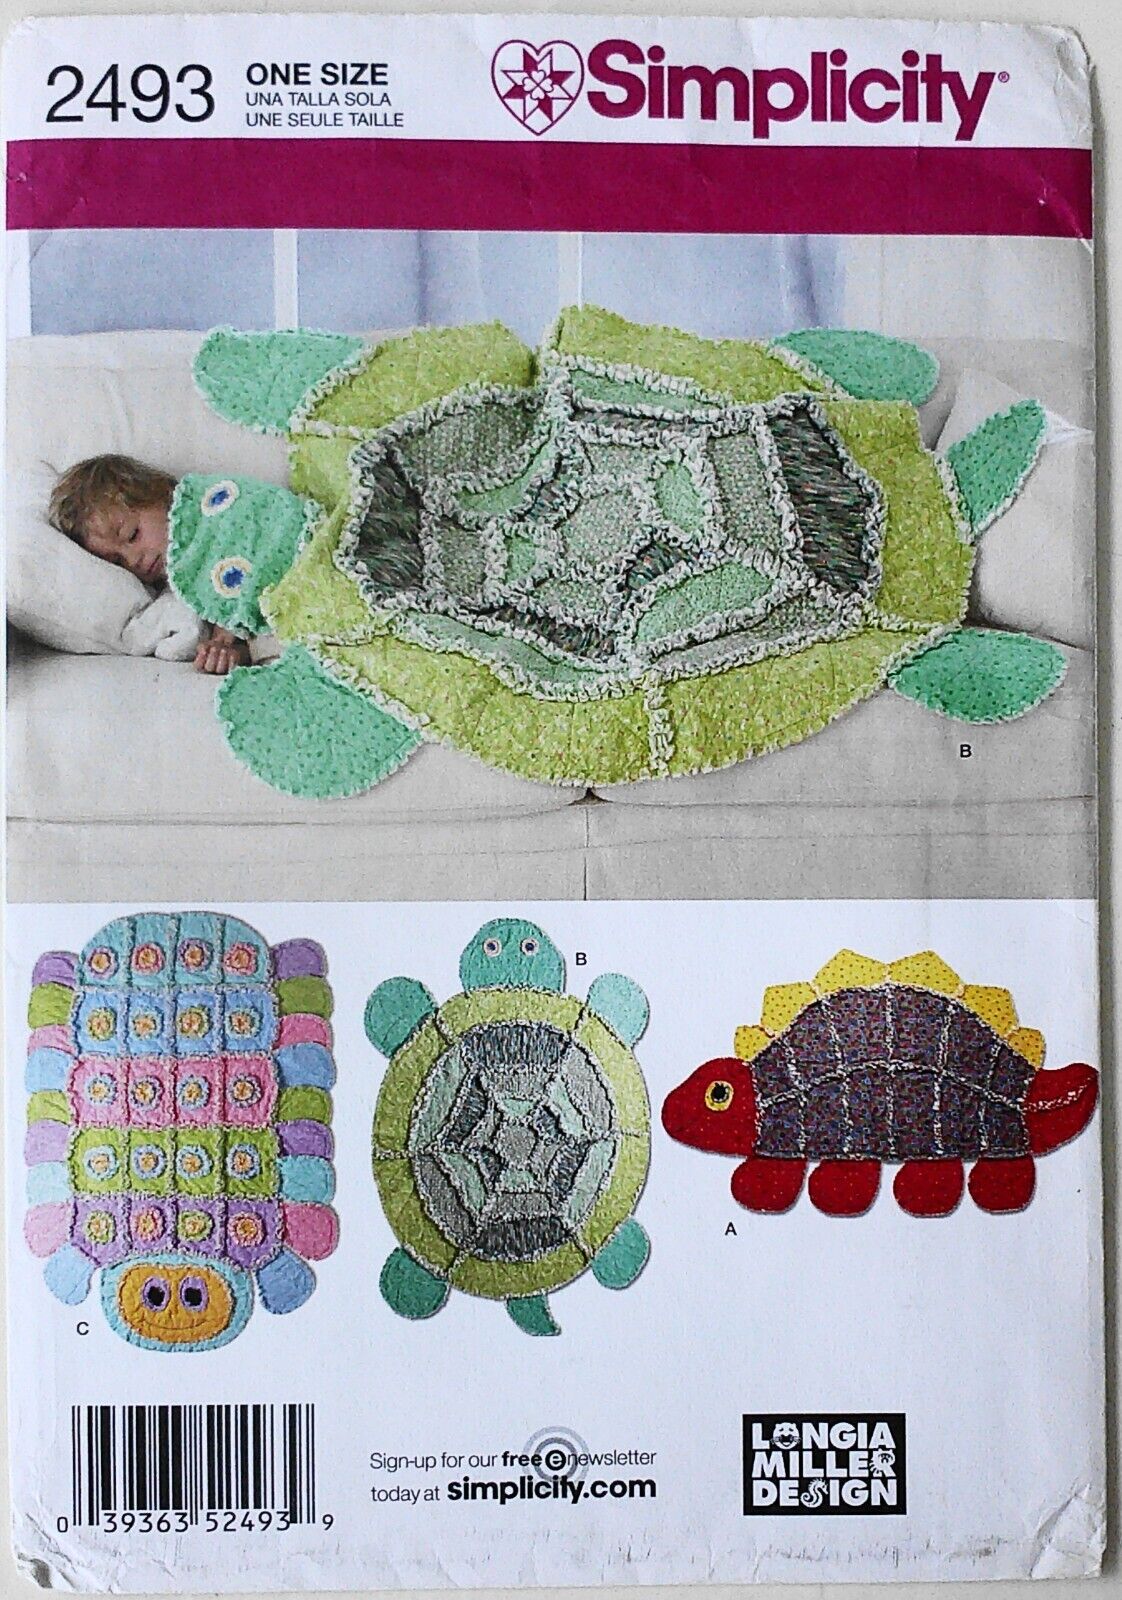 Simplicity 2493 Longia Miller Rag Quilts Dinosaur Turtle Sewing Pattern